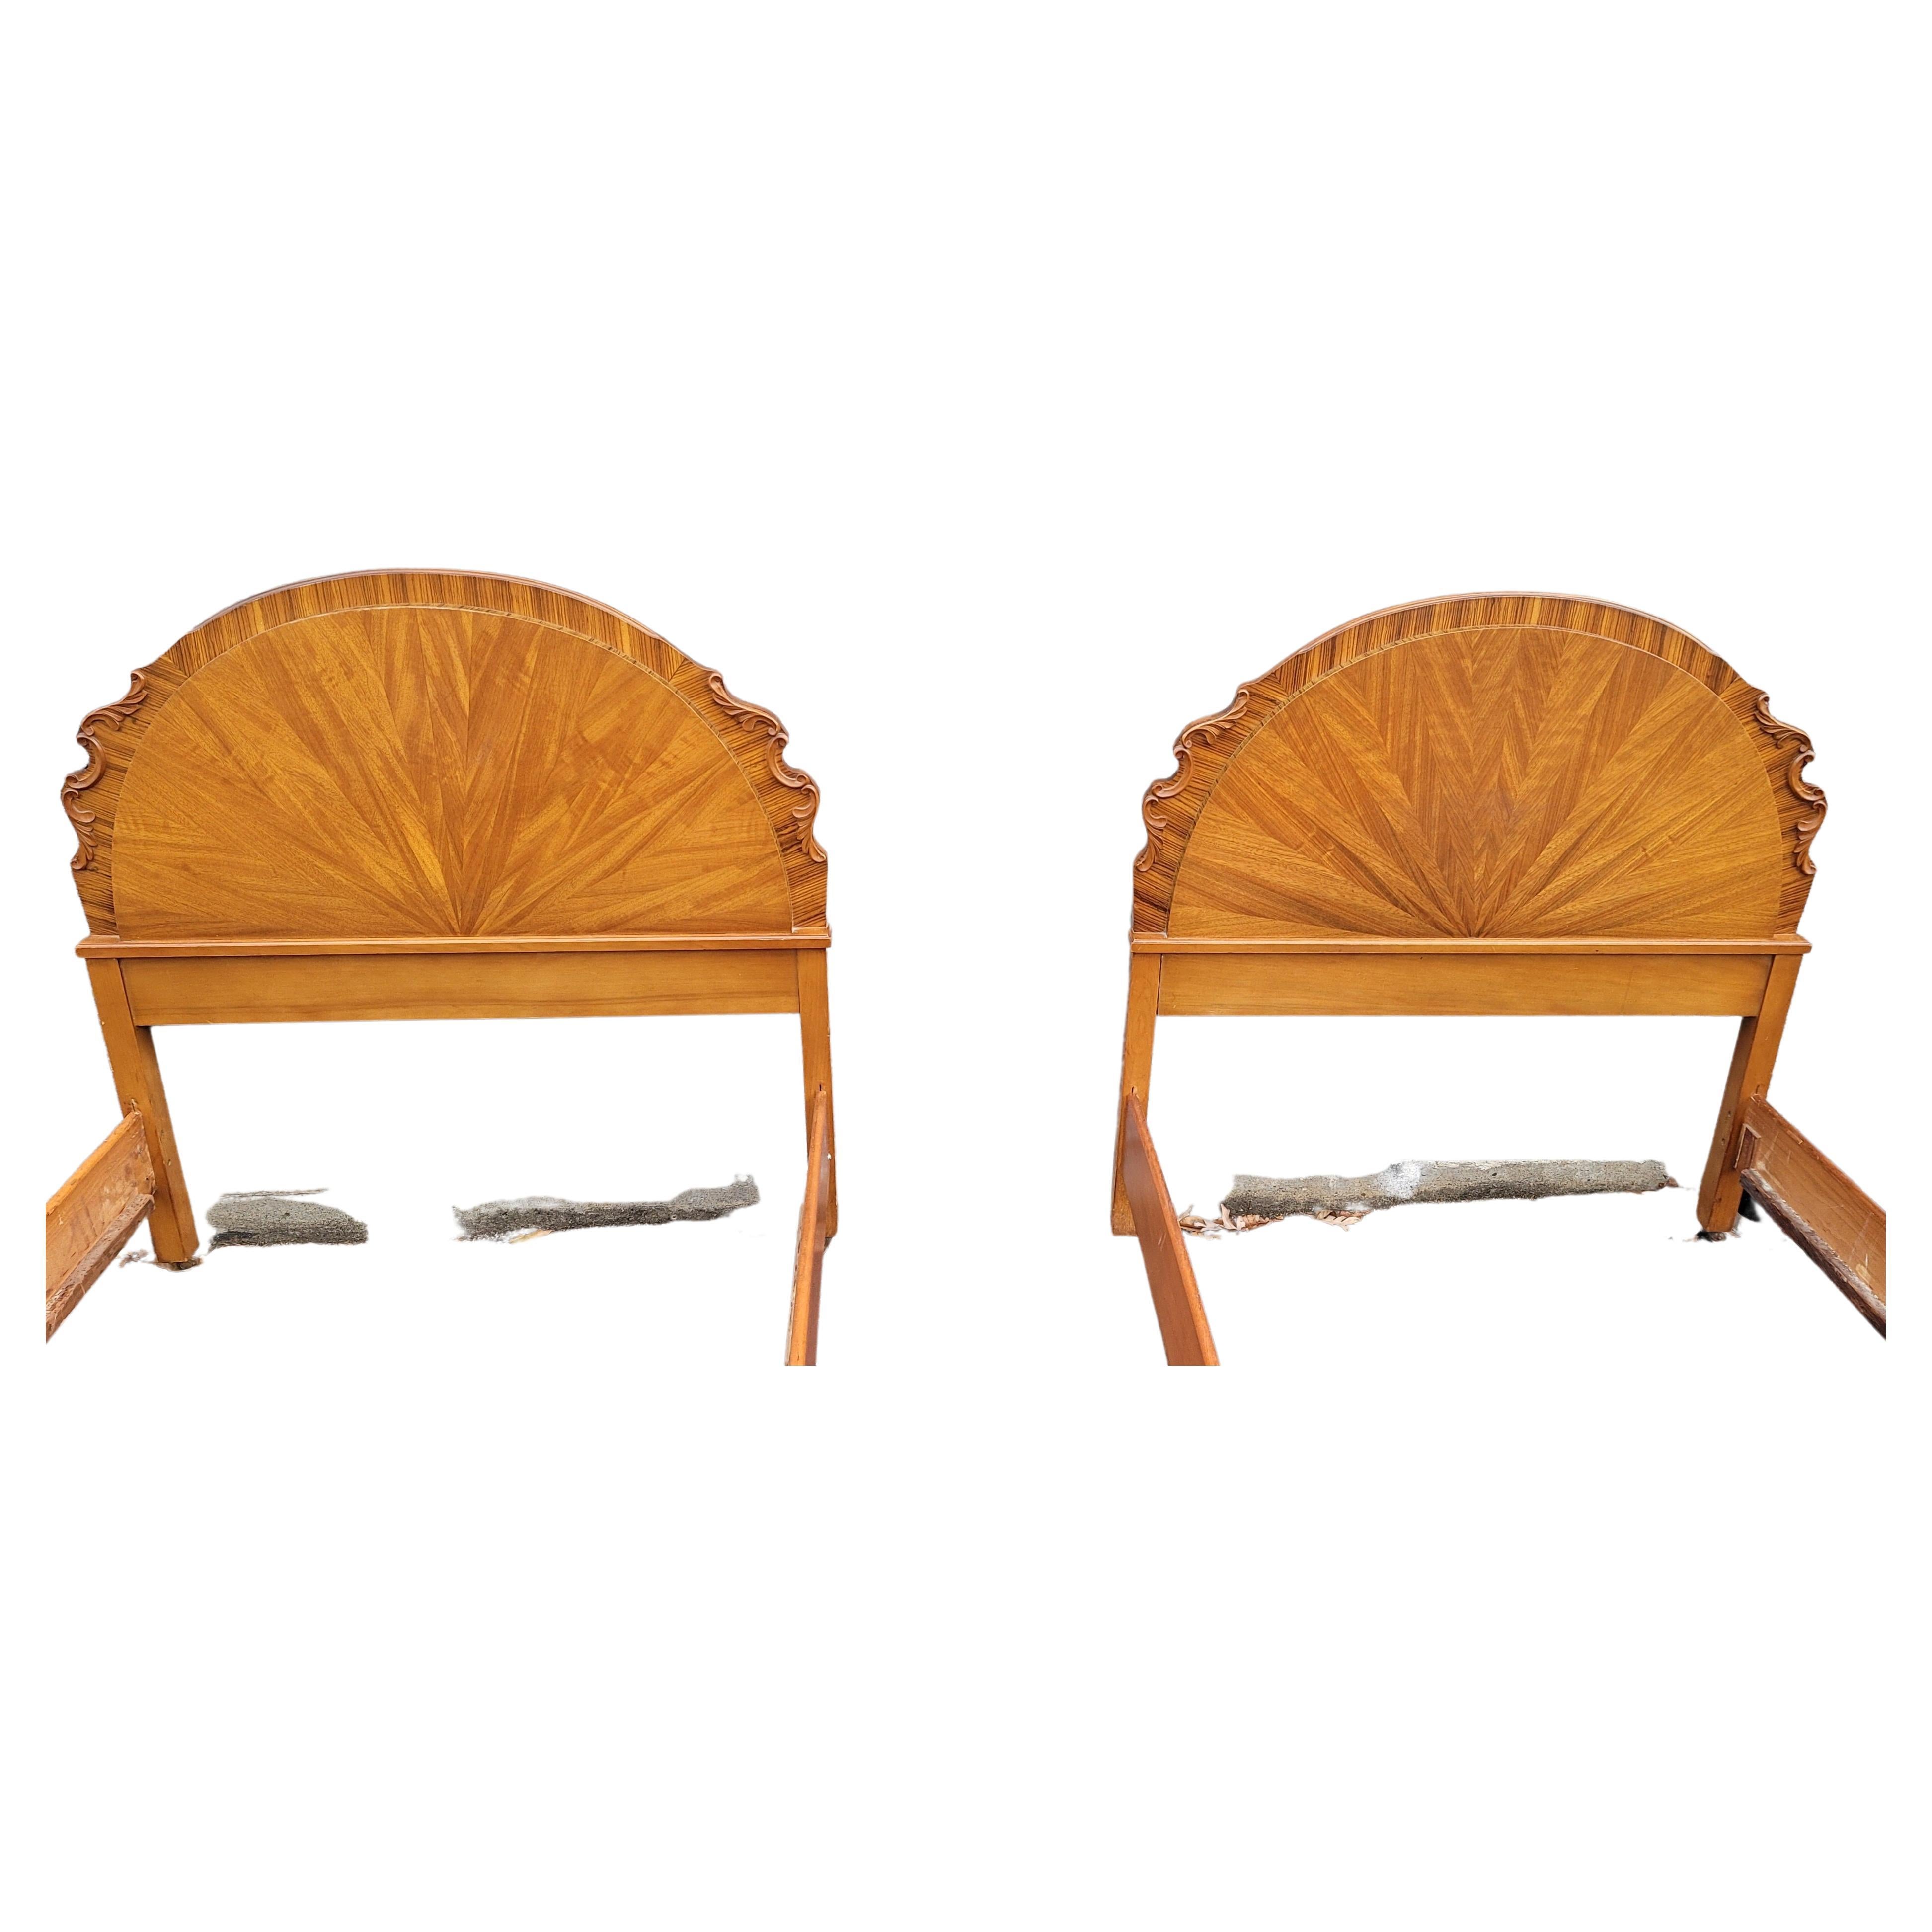 A Pair of 1930s Art Deco Mahogany Twin Size Bedsteads im Angebot 1